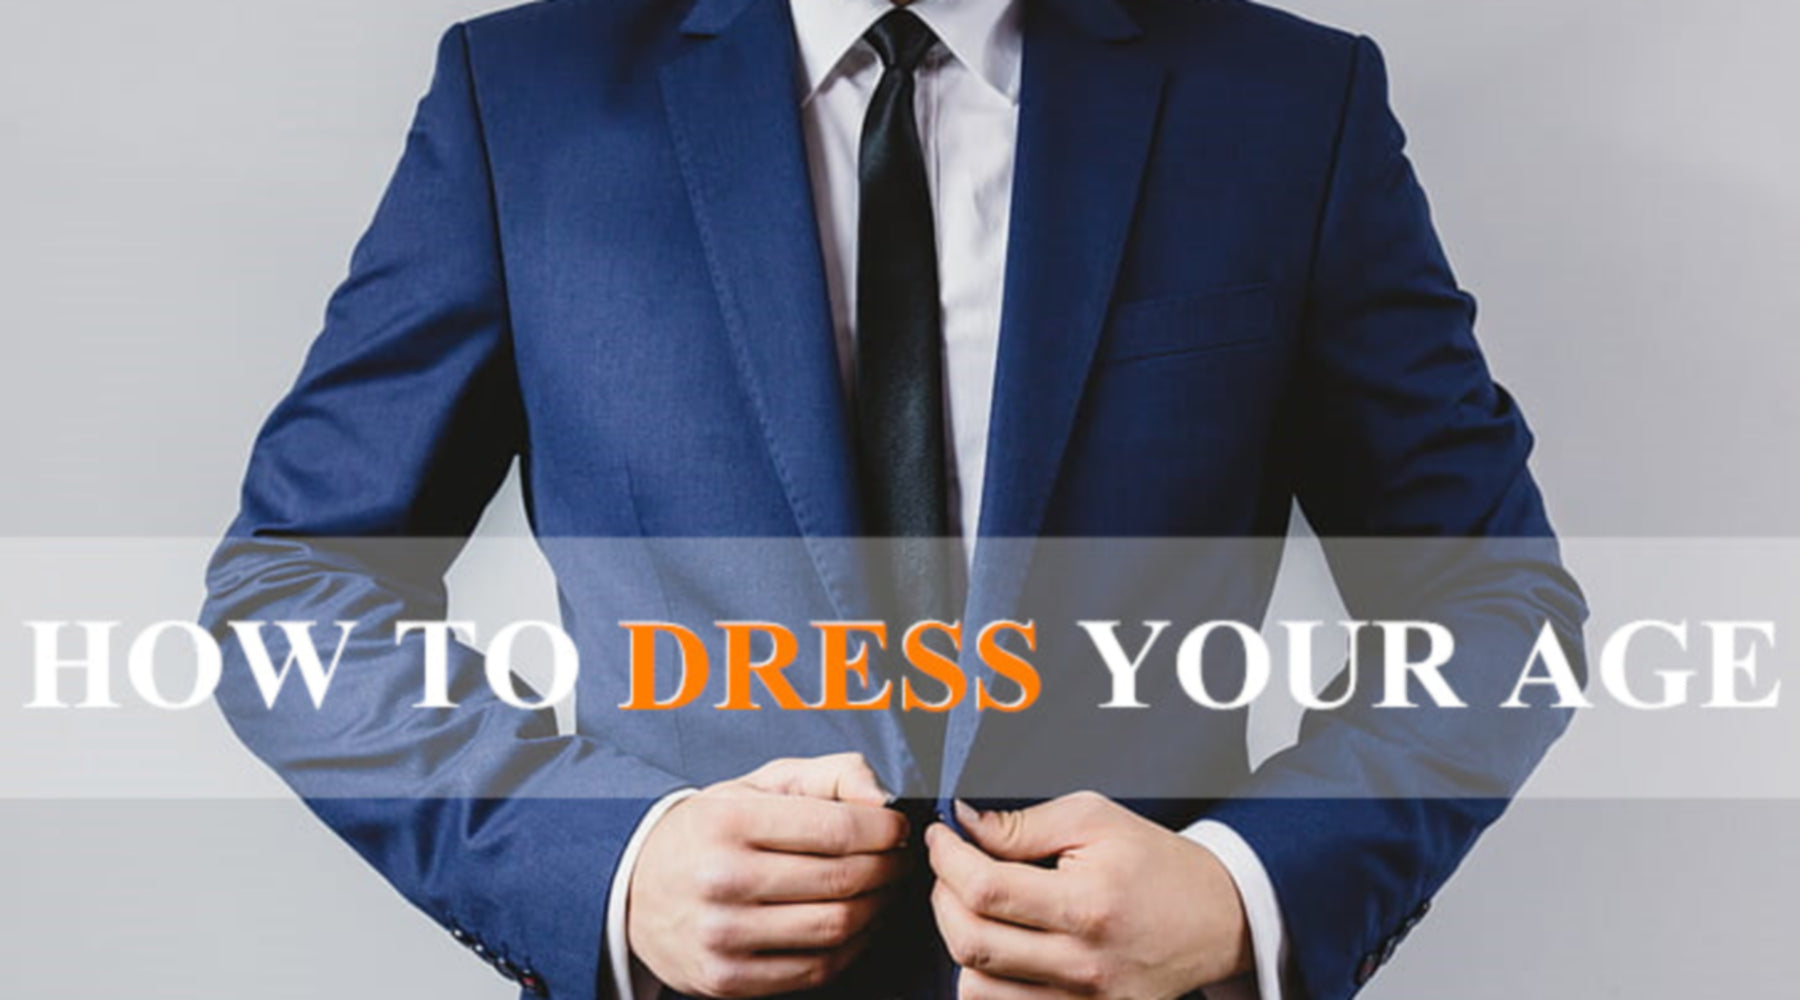 How To Dress Your Age - Dressing Code For Different Age Groups